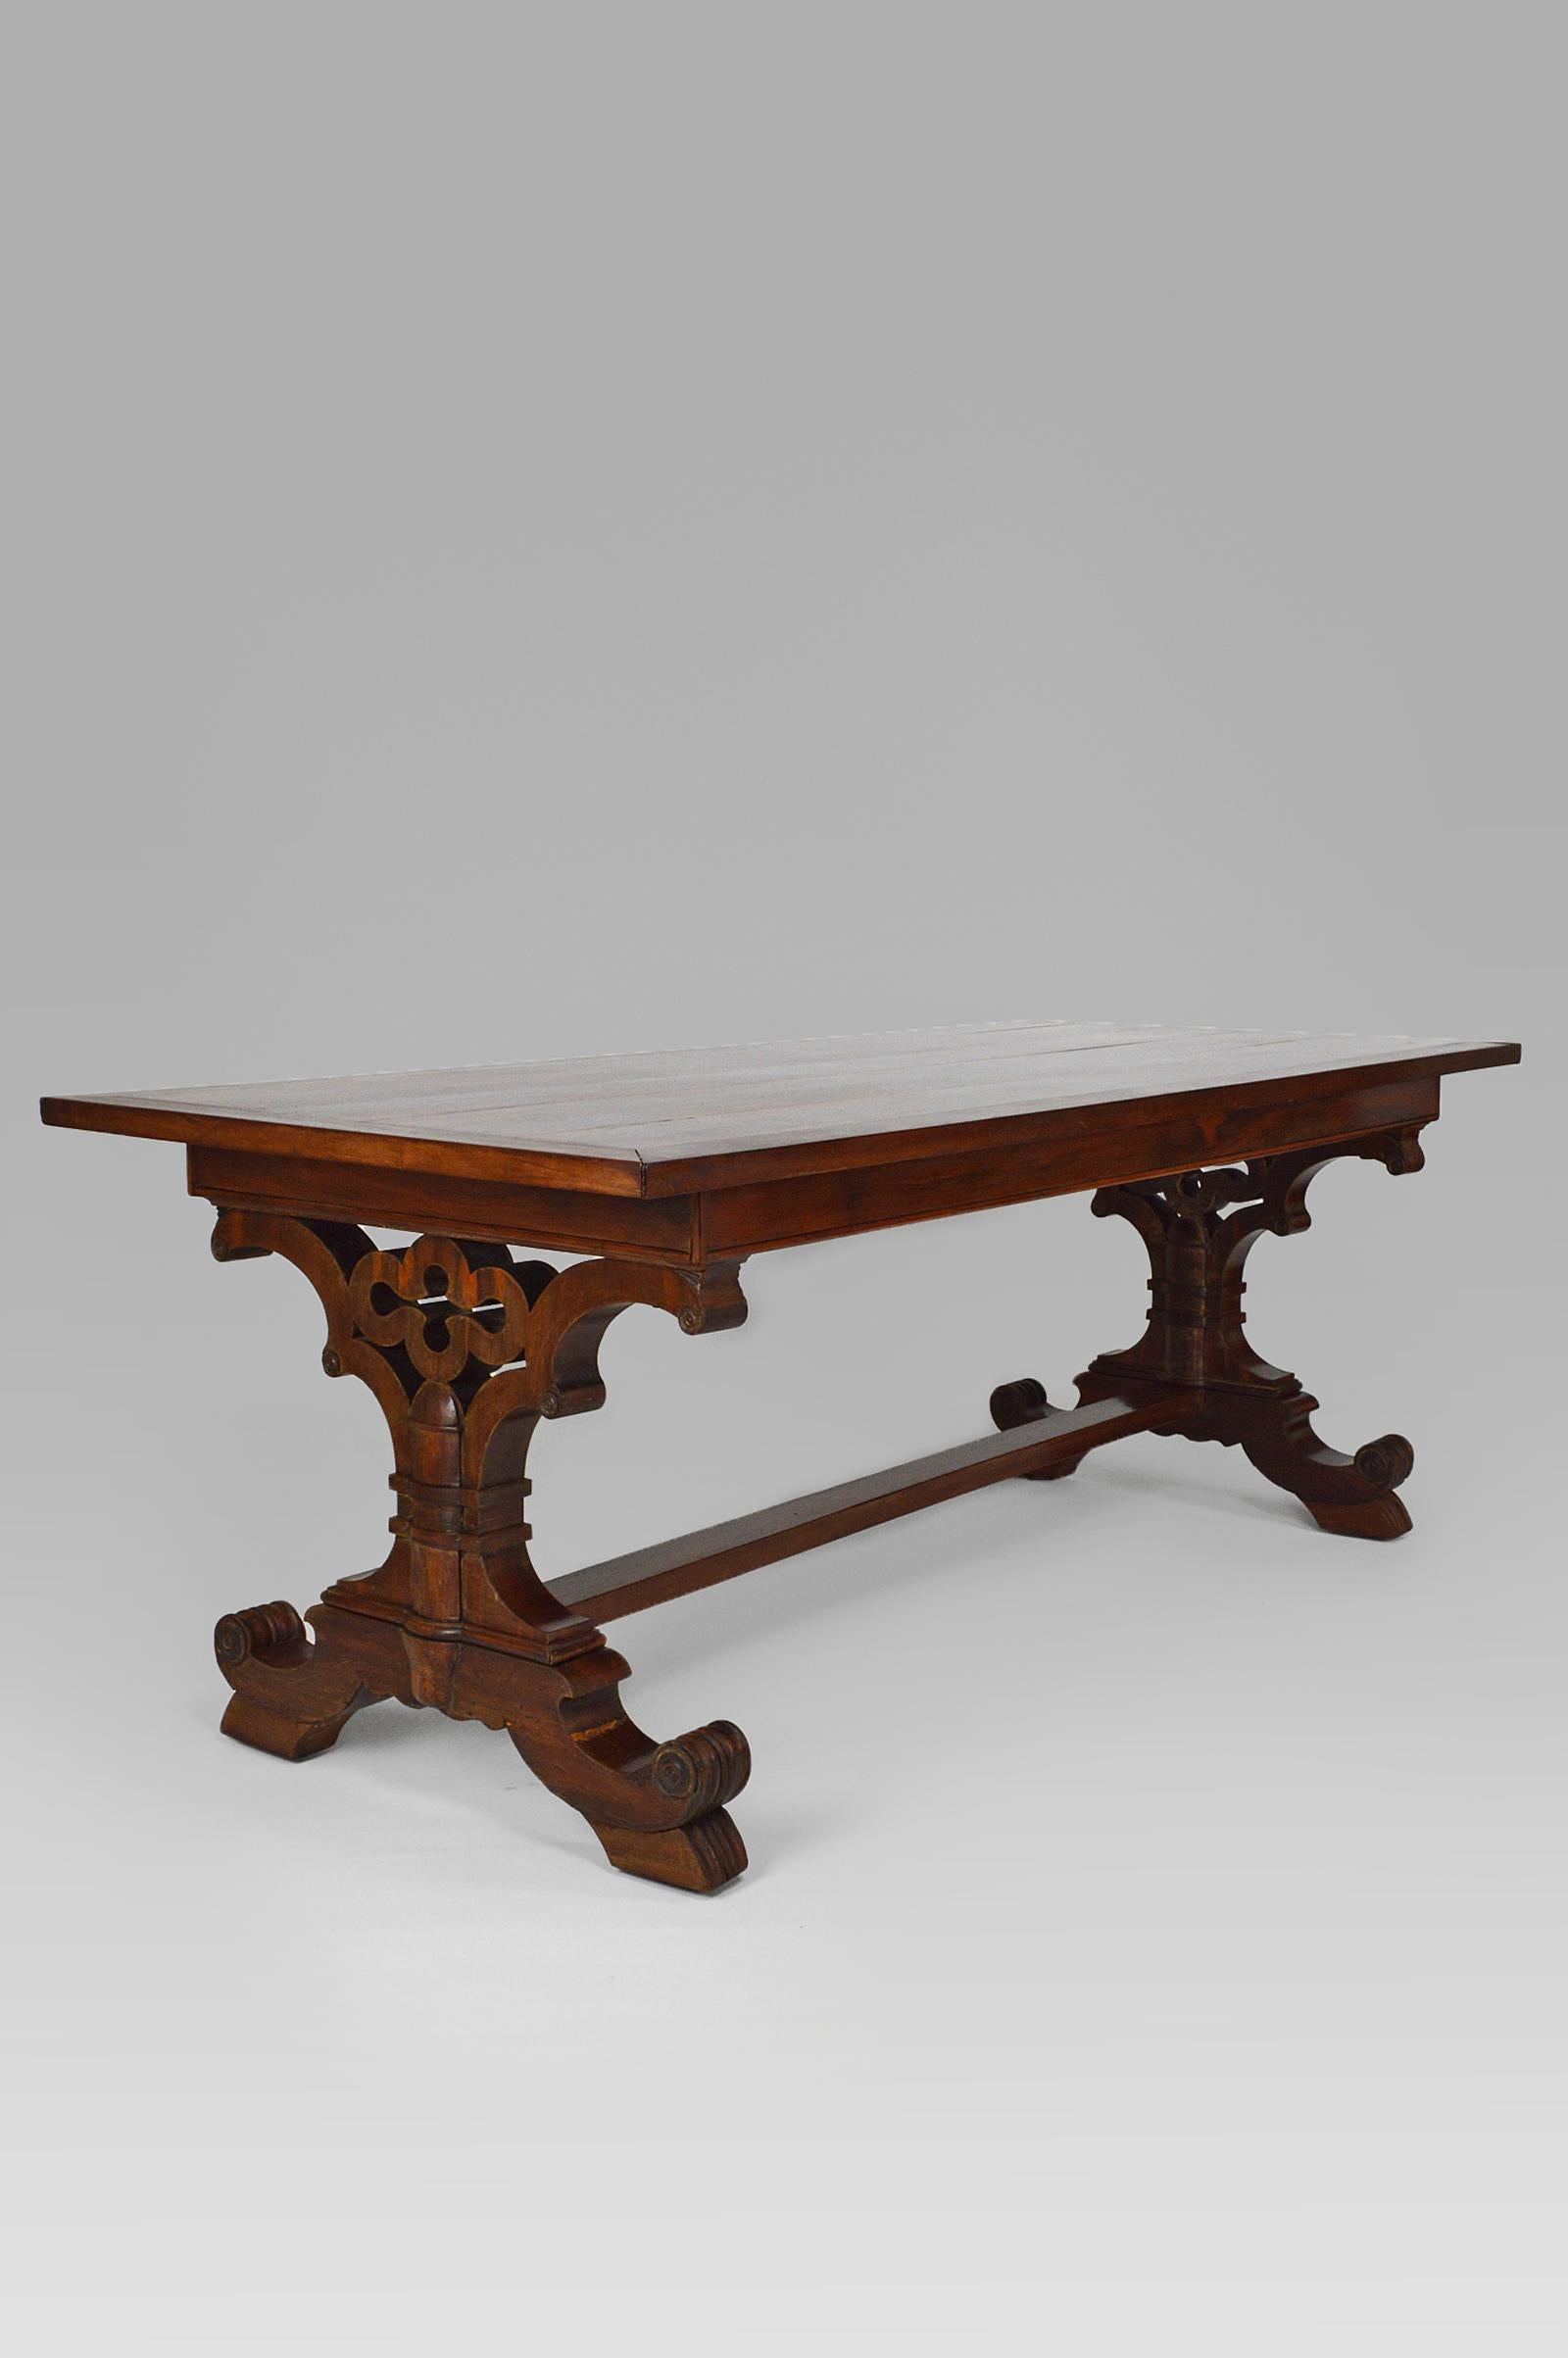 Gothic Revival Dining Table in Mahogany, Victorian Era, circa 1840 For Sale 7